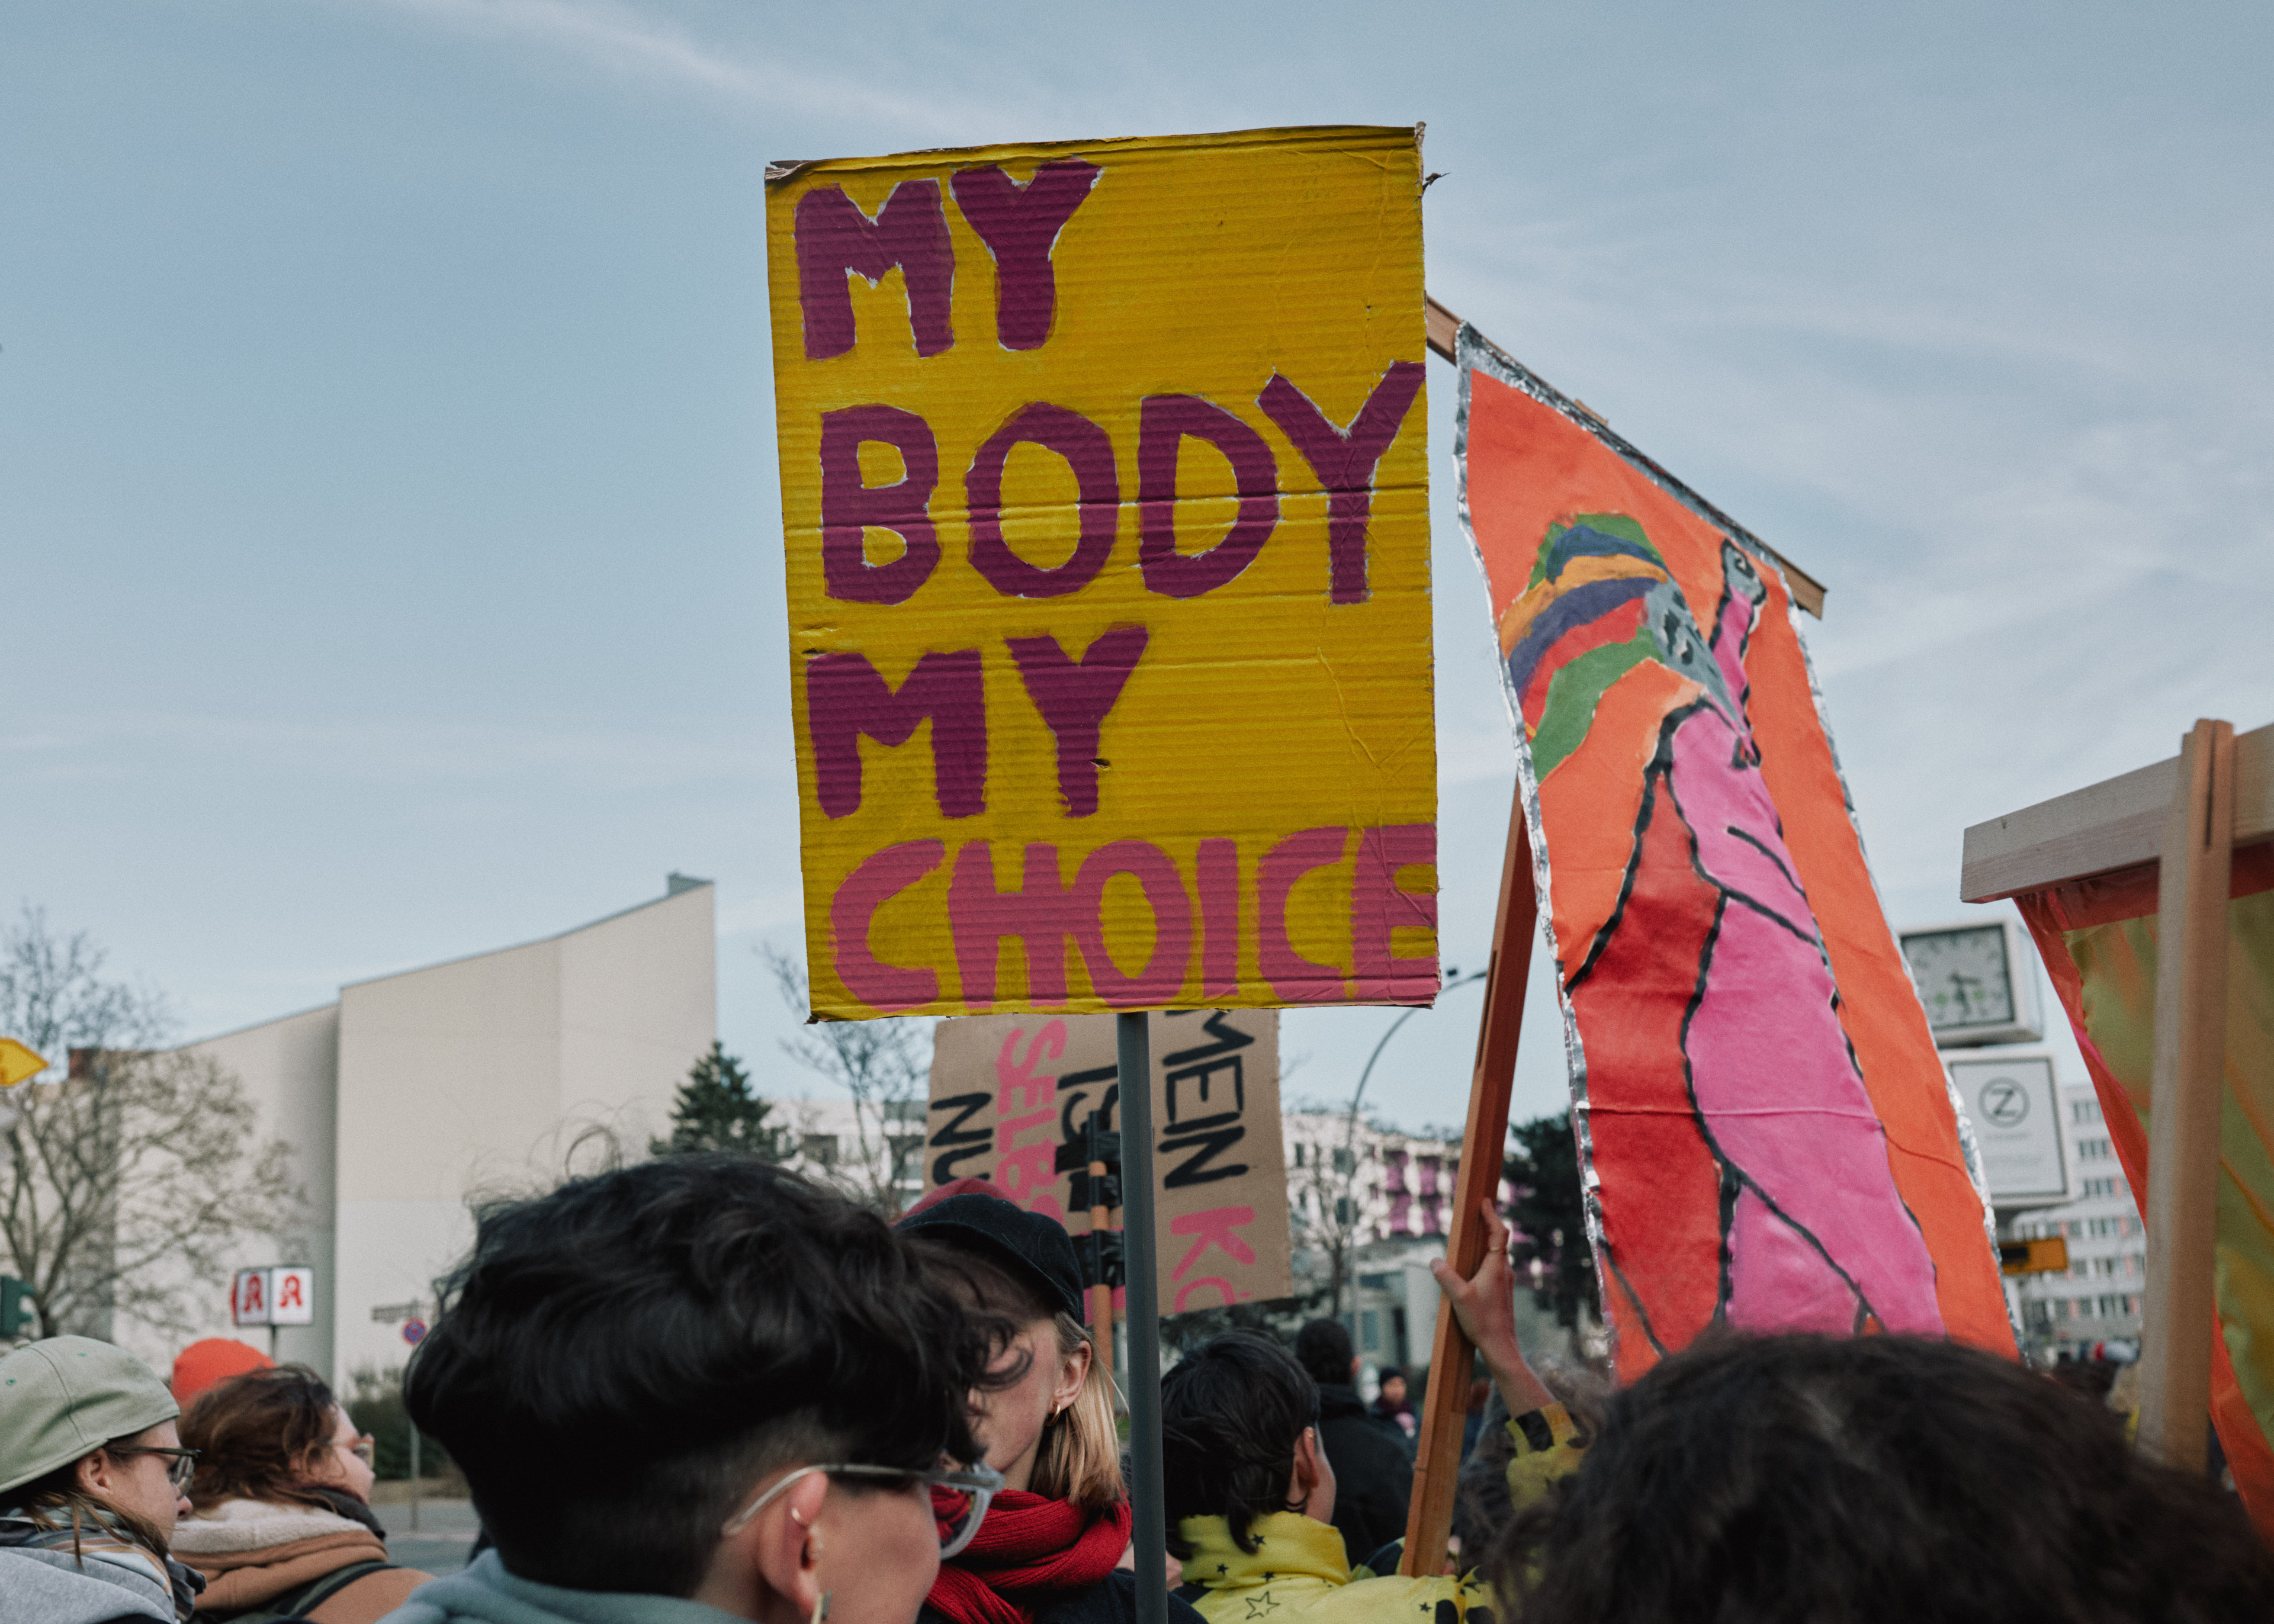 A protestor holds a sign: "My body my choice"